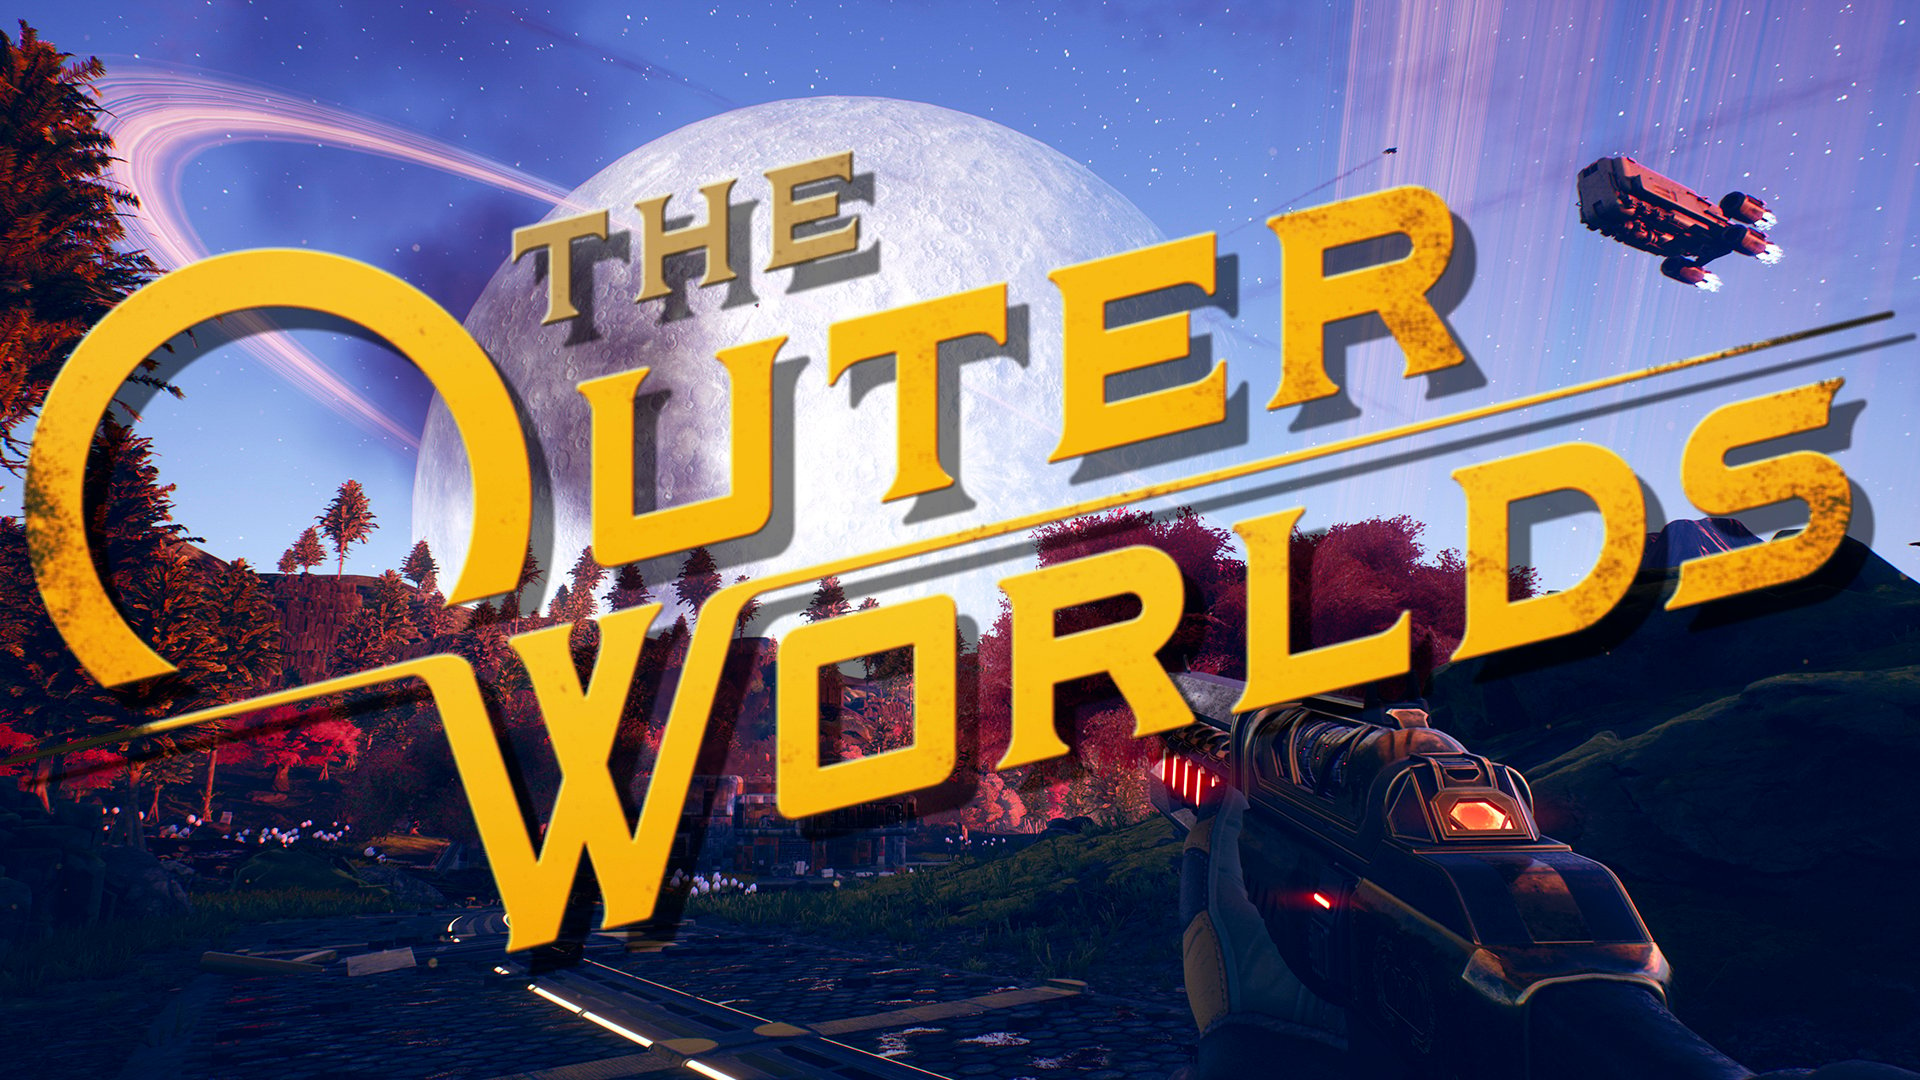 The Outer Worlds Video Game HD Wallpaper 68092 1920x1080px